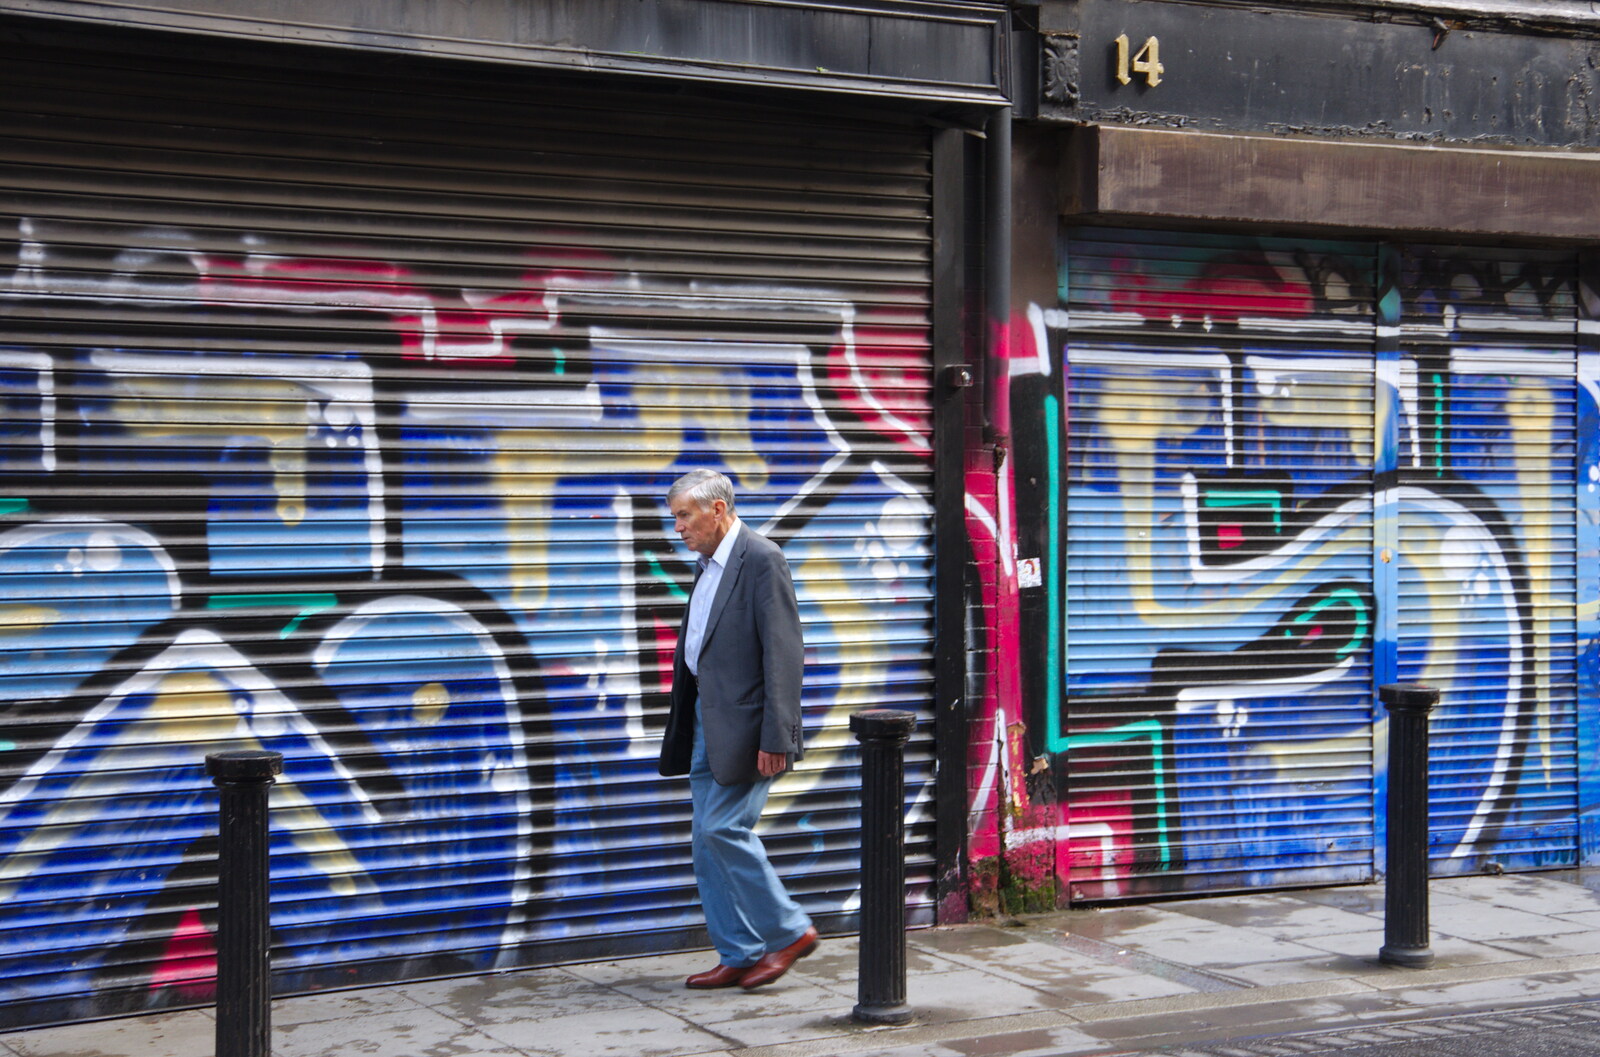 Some dude walks past graffiti shutters from Busking in Temple Bar, Dublin, Ireland - 12th August 2019